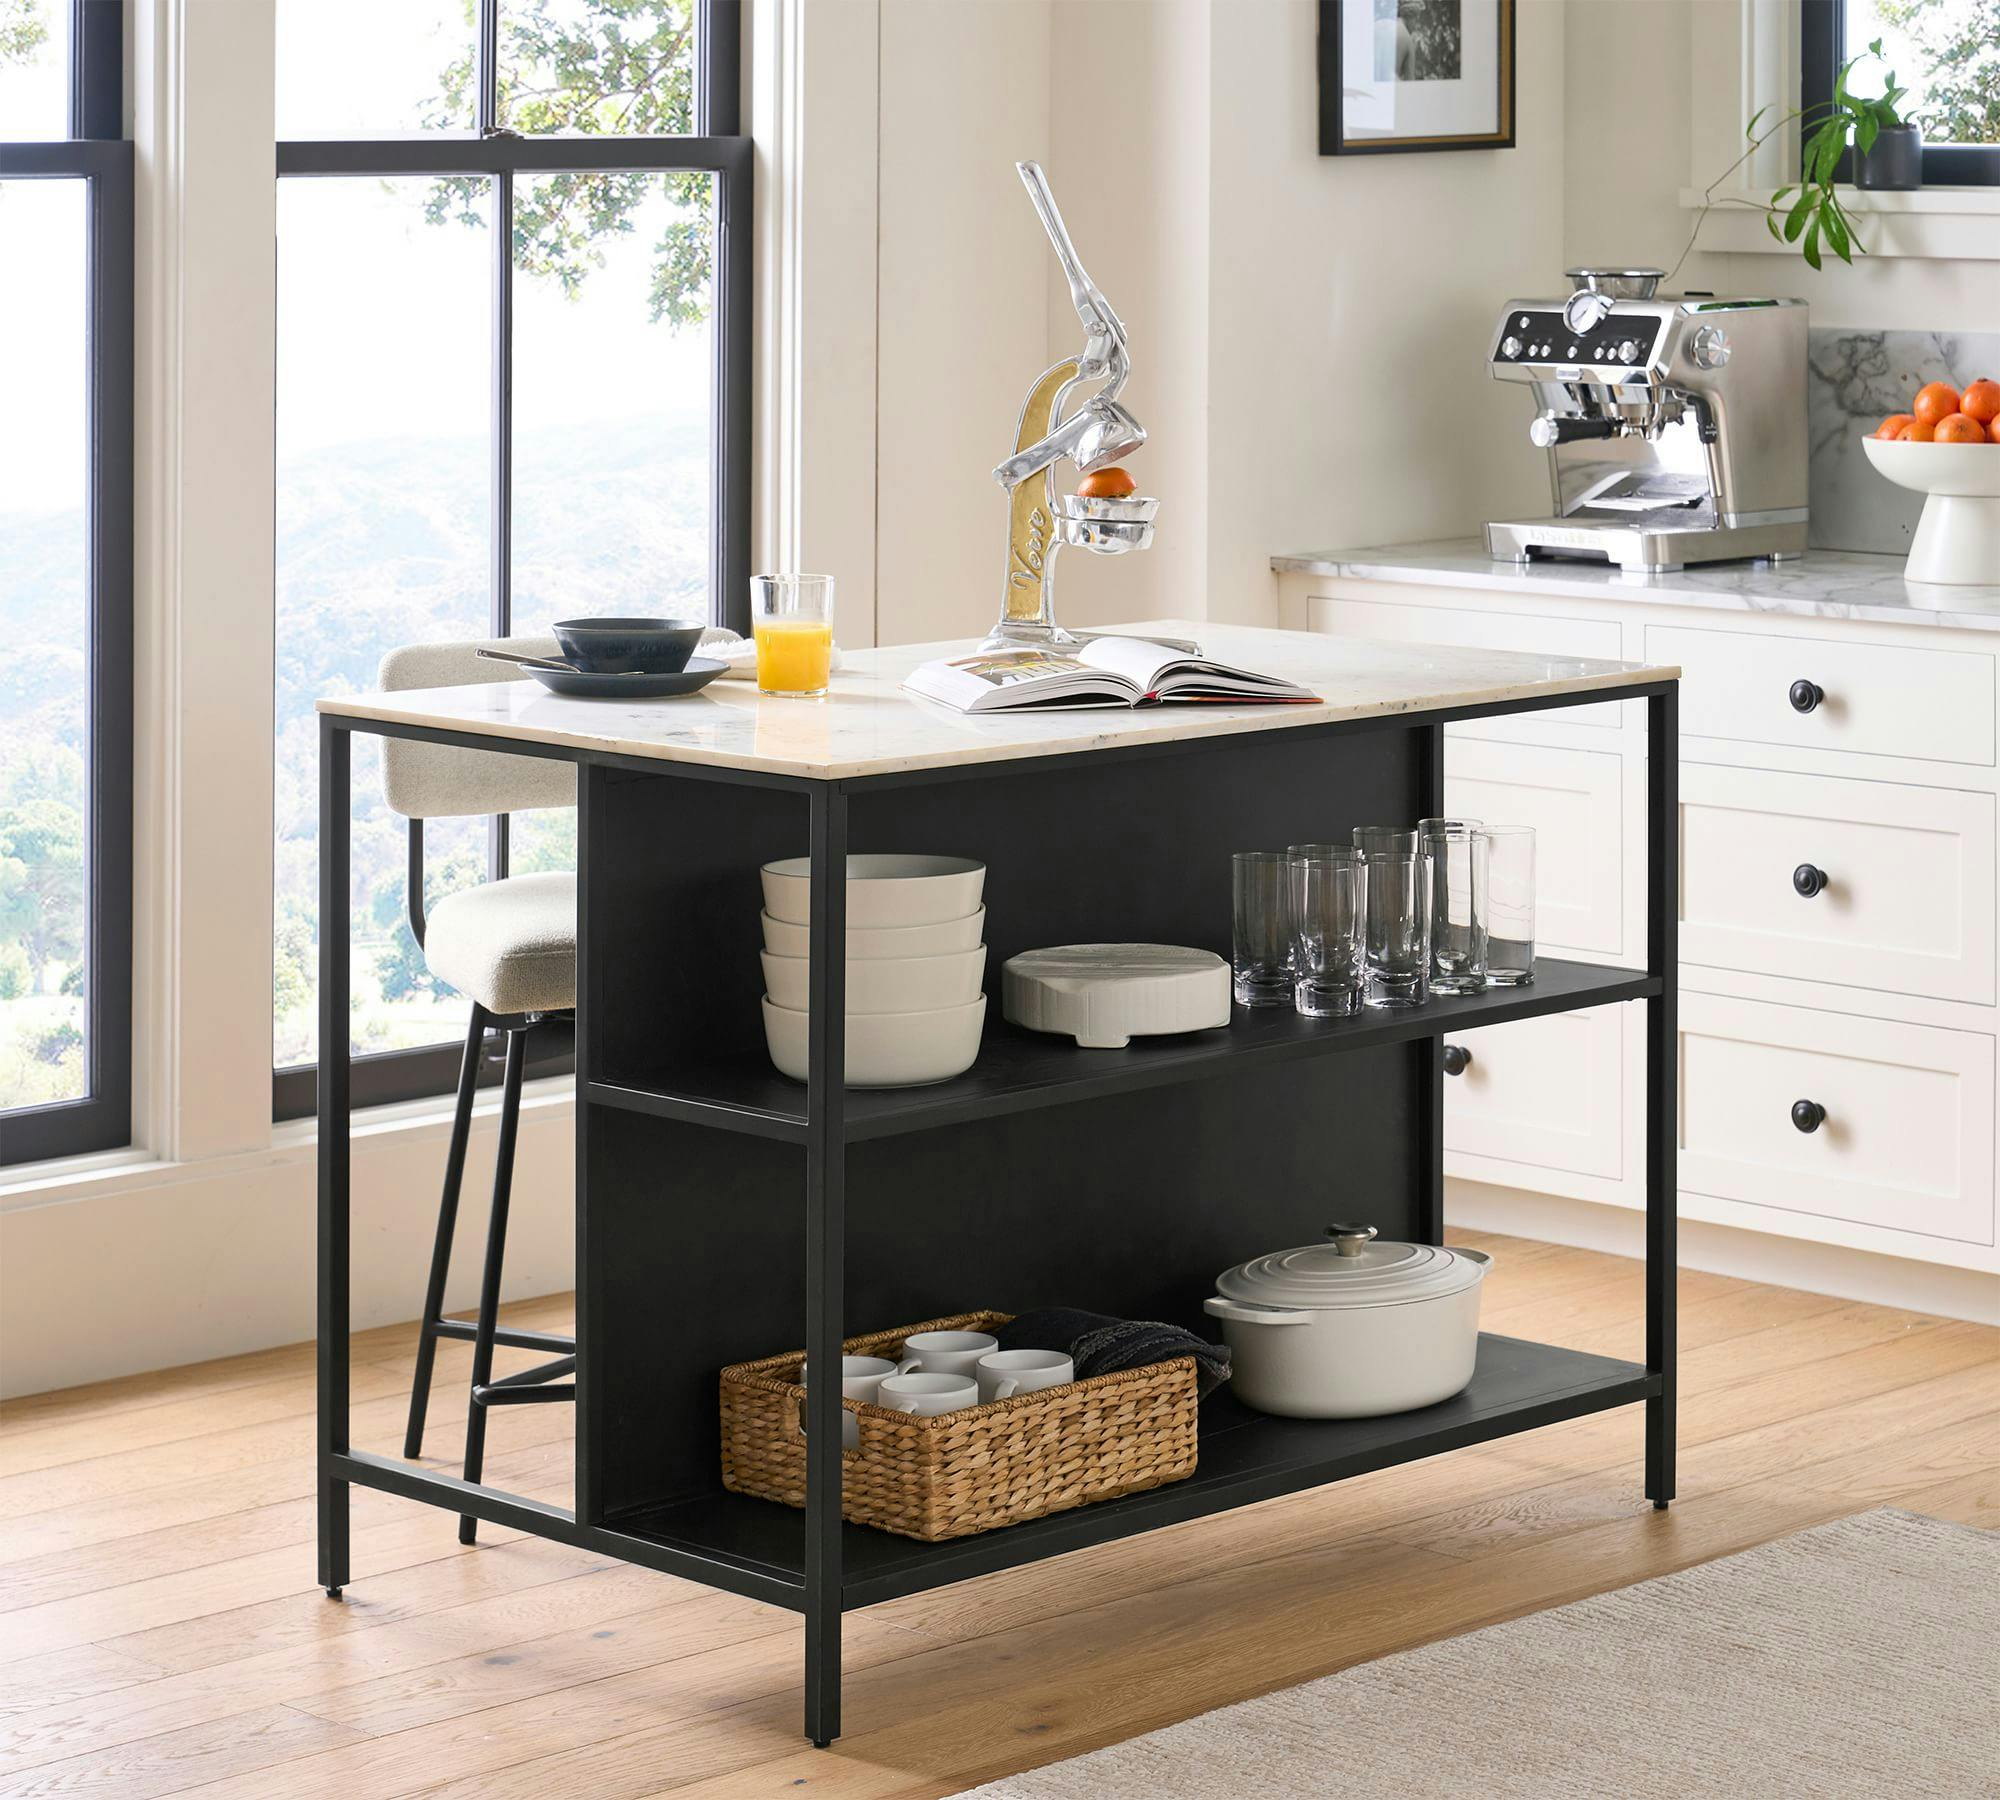 Delaney Kitchen Console from Pottery Barn